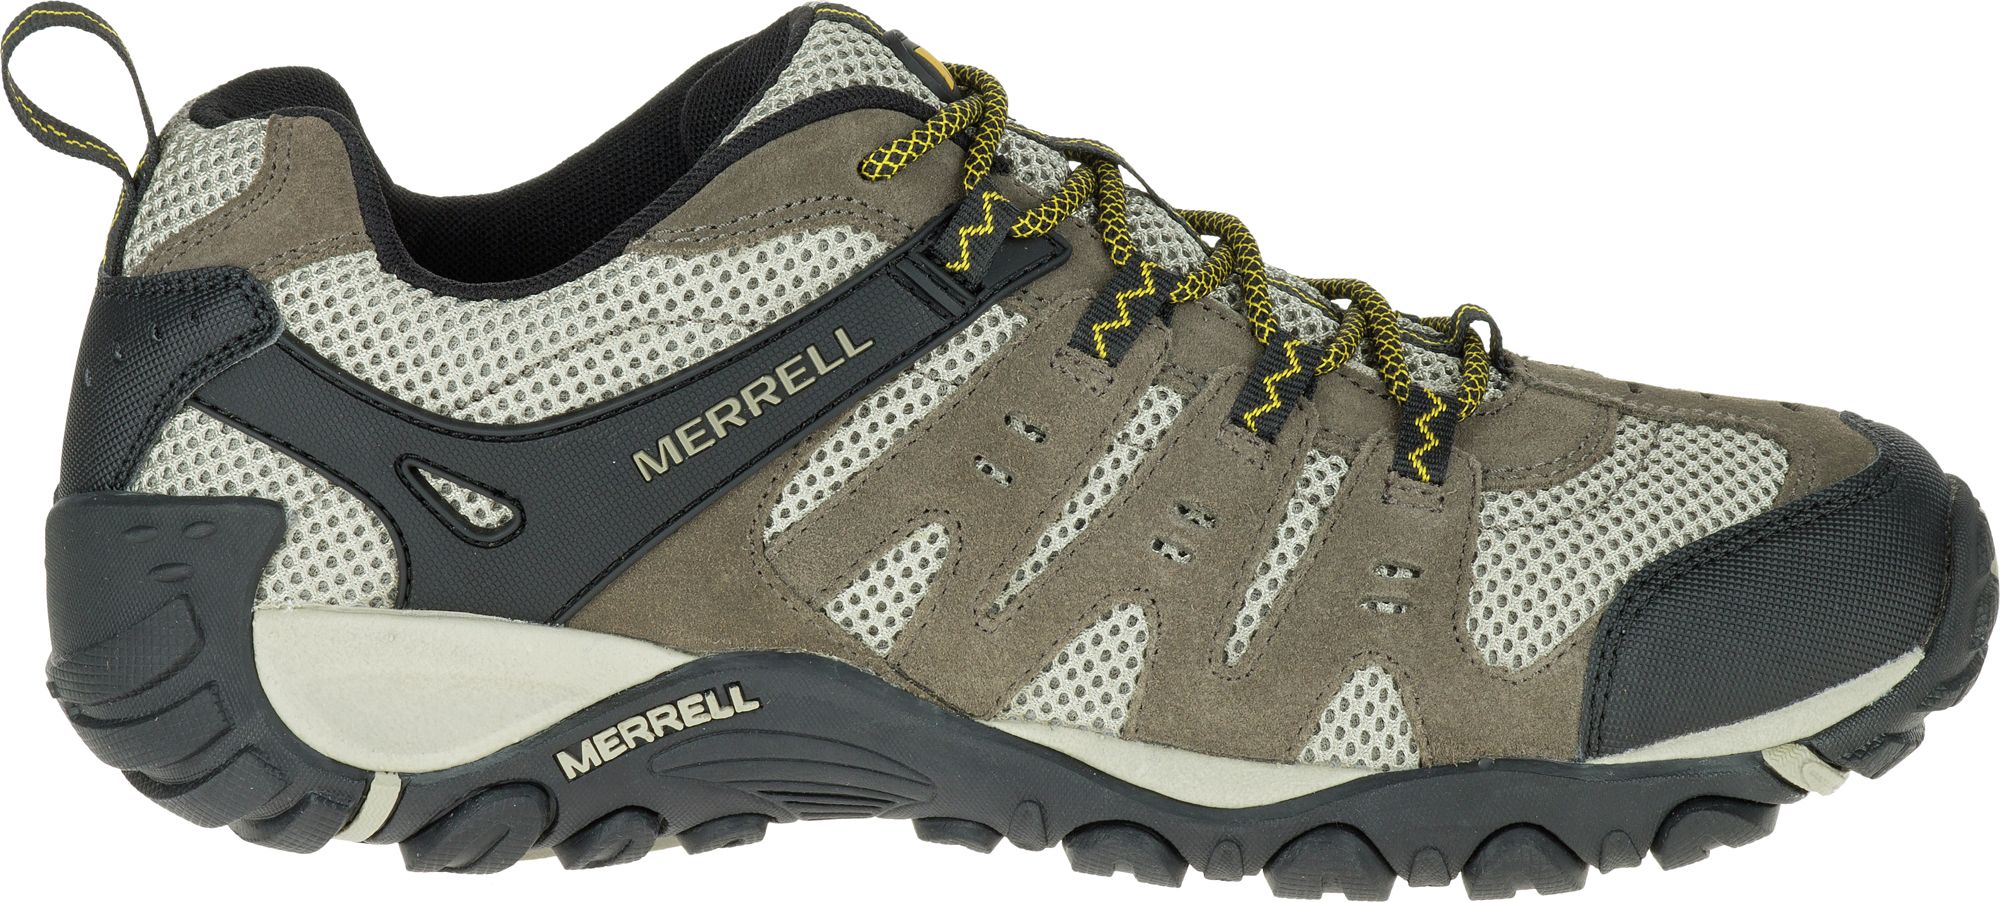 Accentor Vent Hiking Shoes 